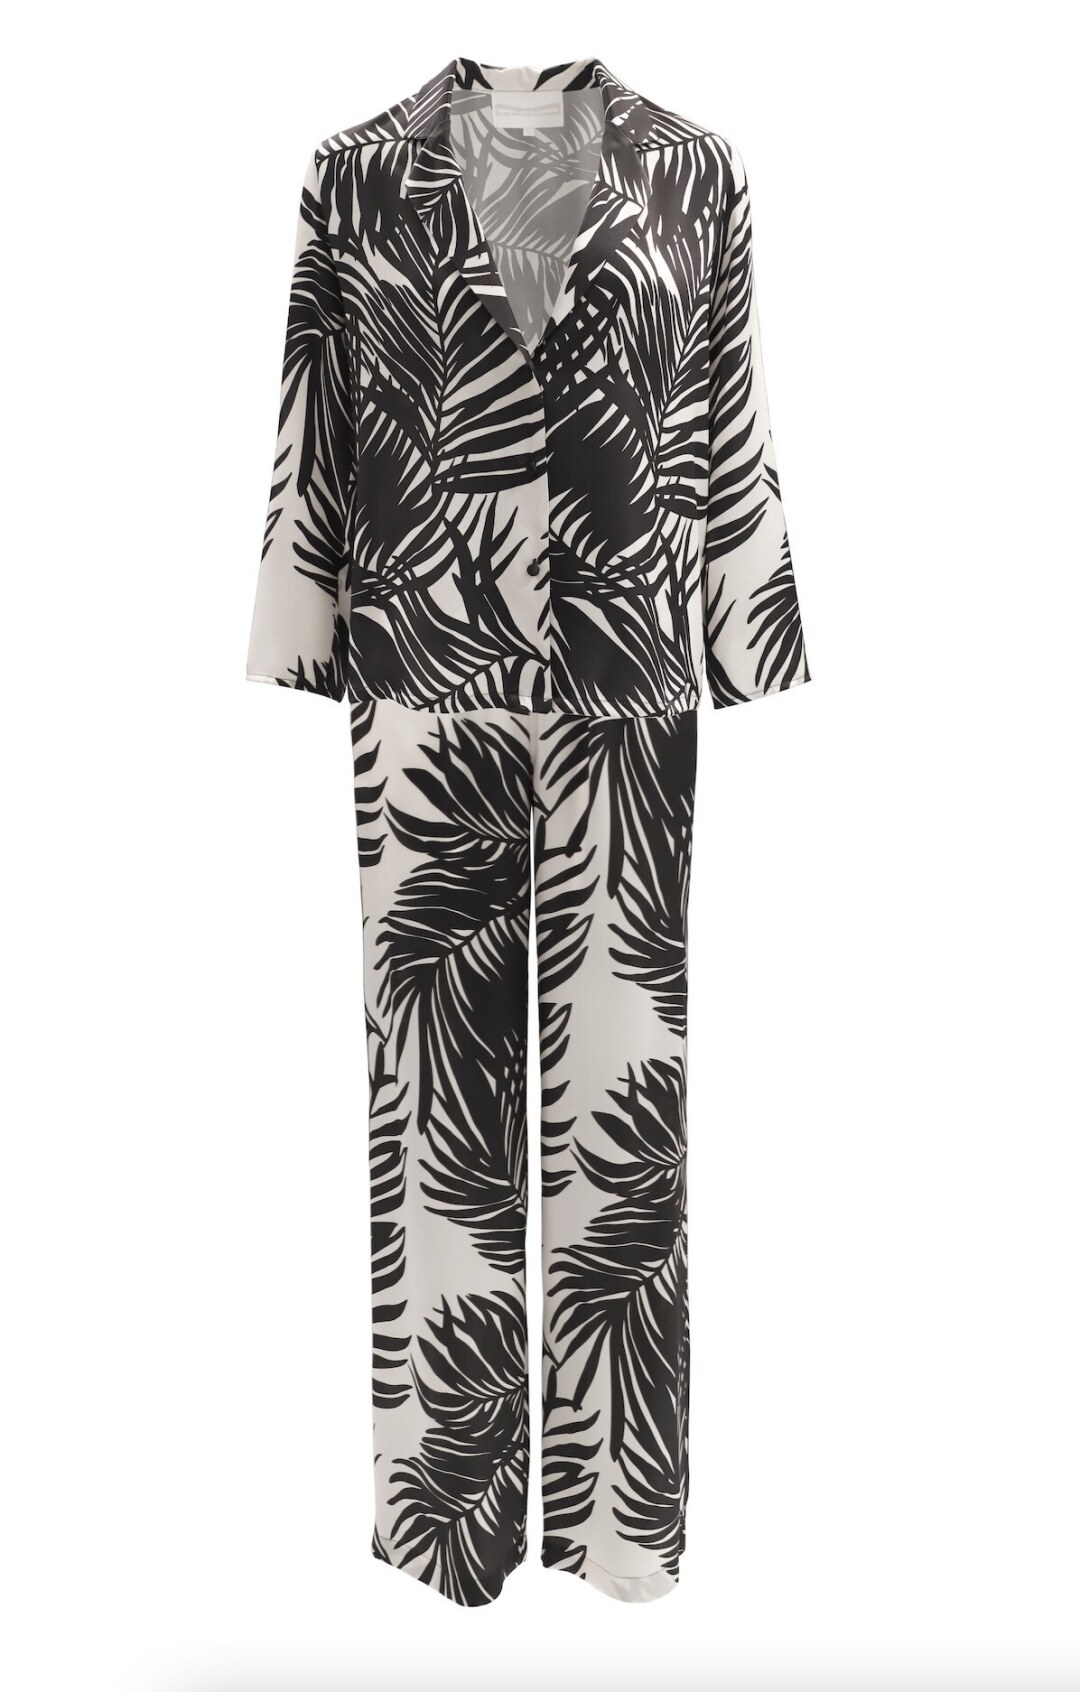 Set of loungewear with a pattern of black palm leaves